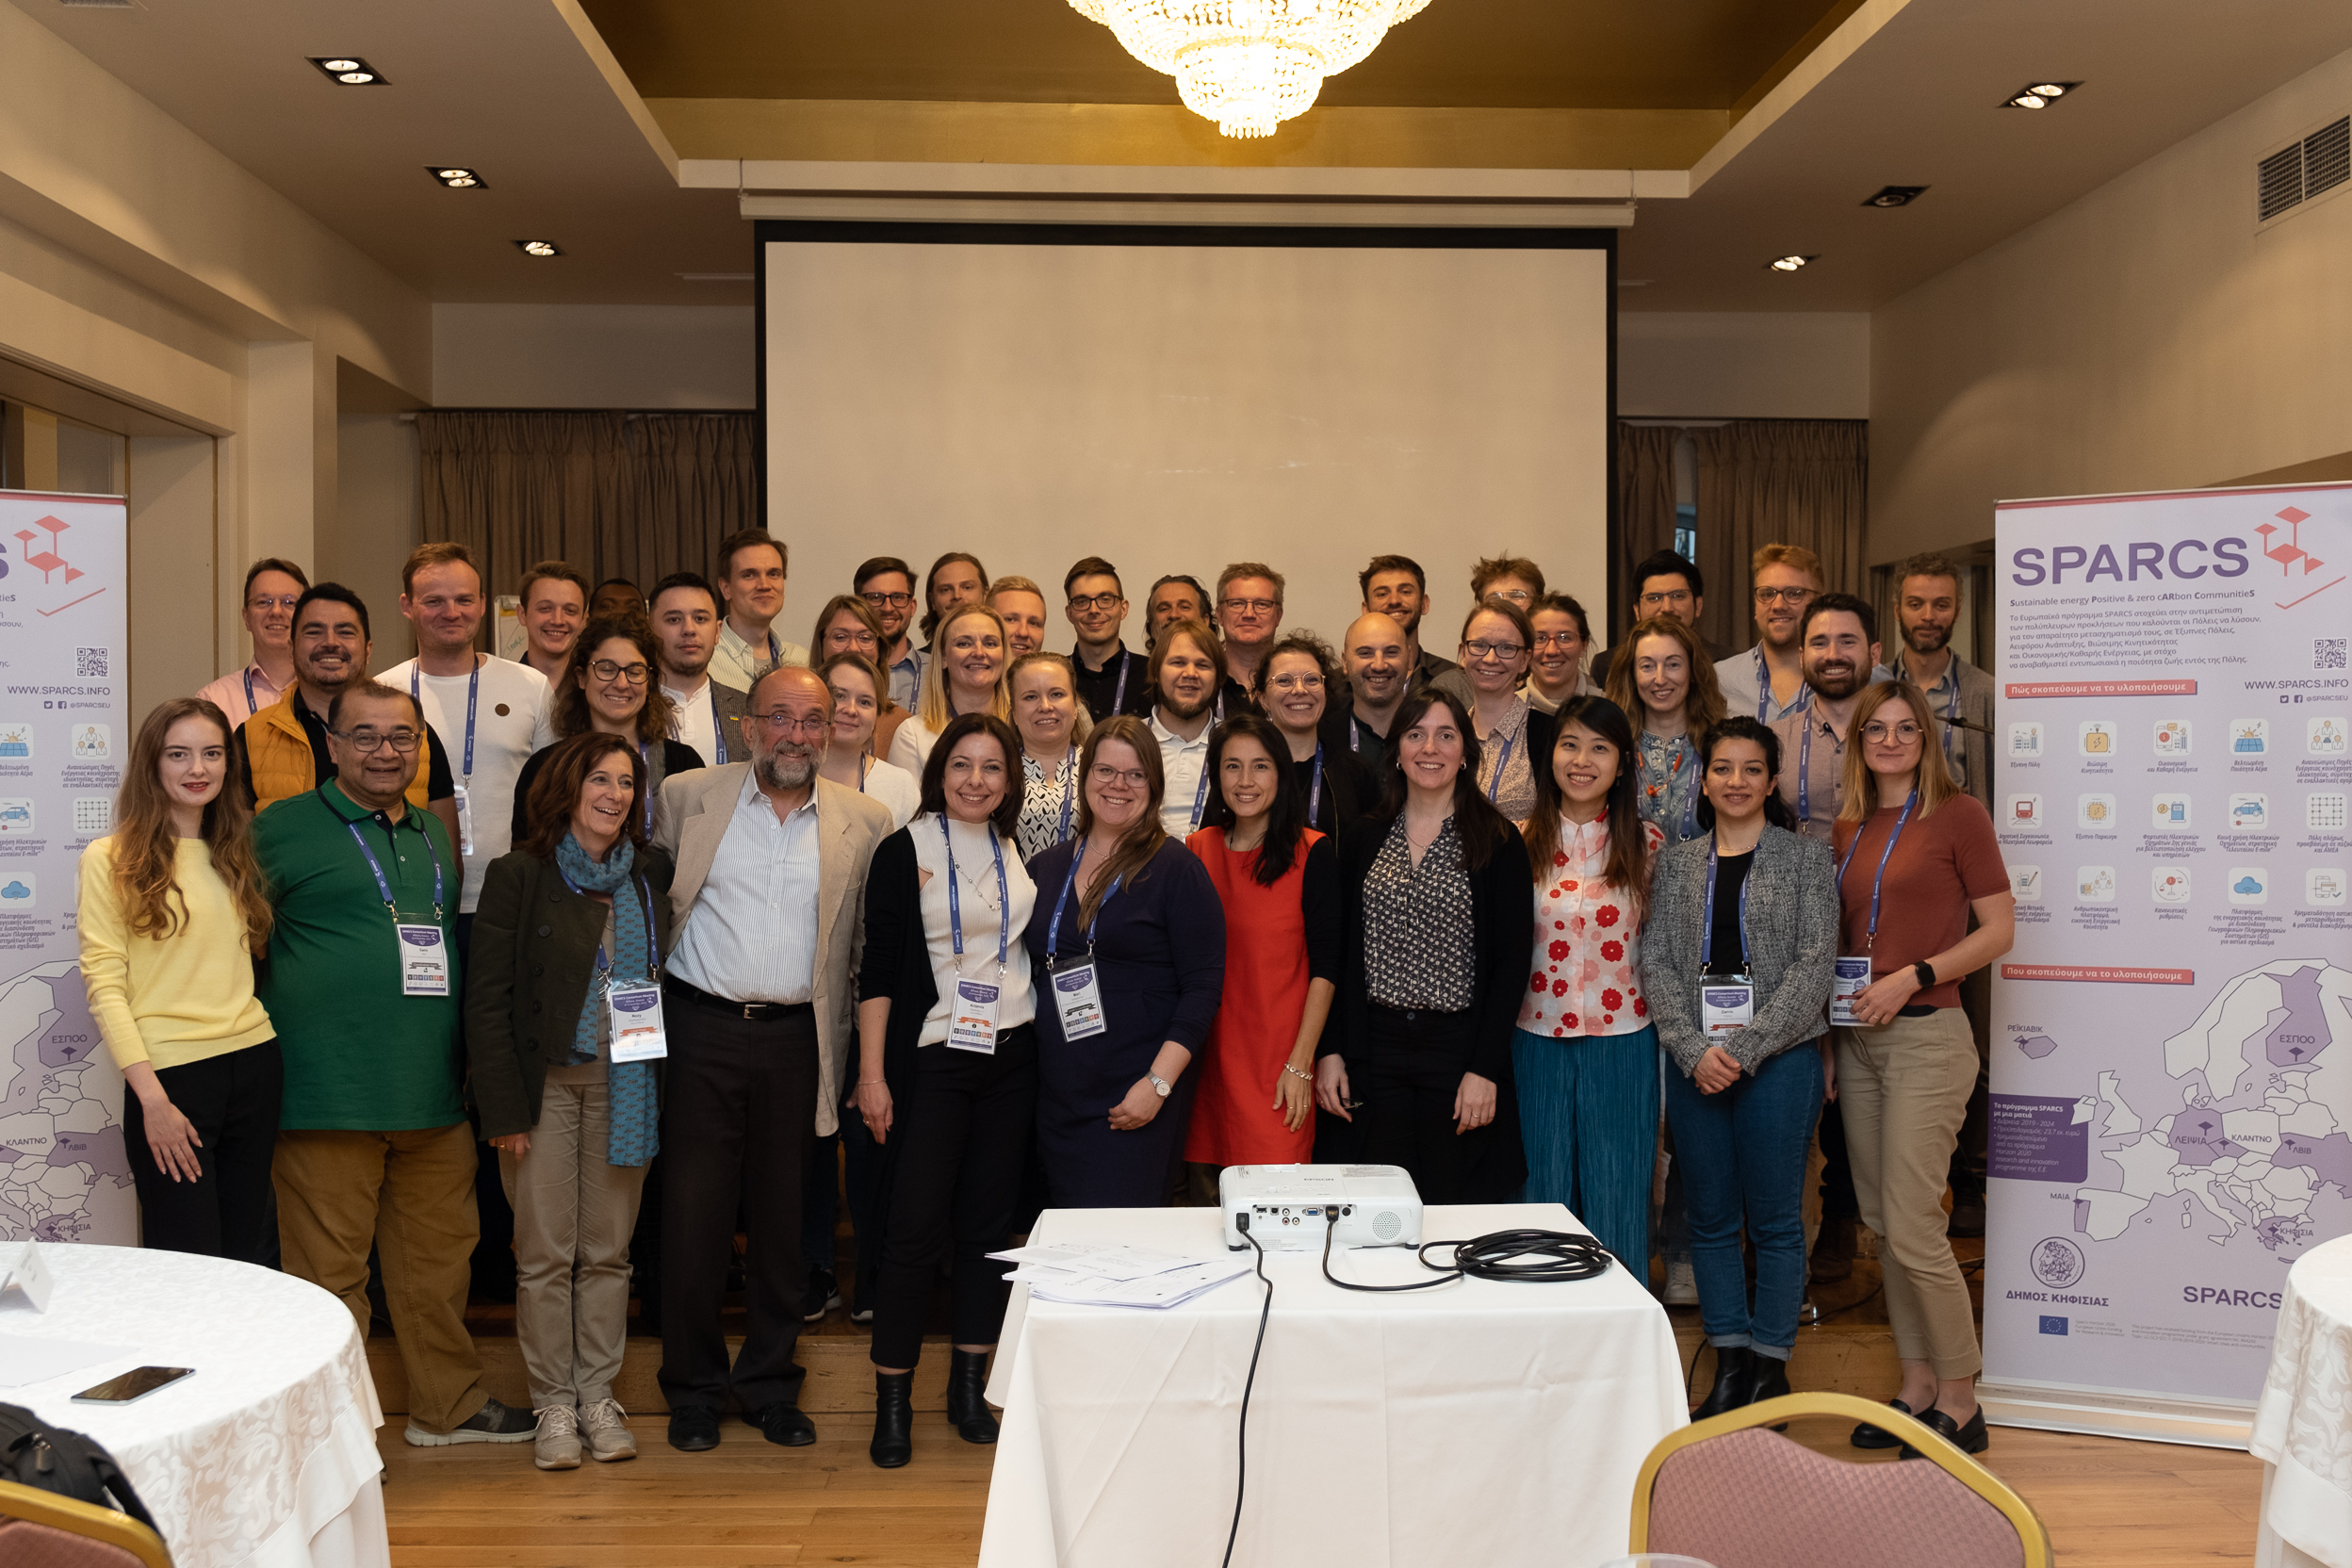 The 7th City Forum Workshop Was Held in Kifissia, Greece as part of the SPARCS Consortium Meeting